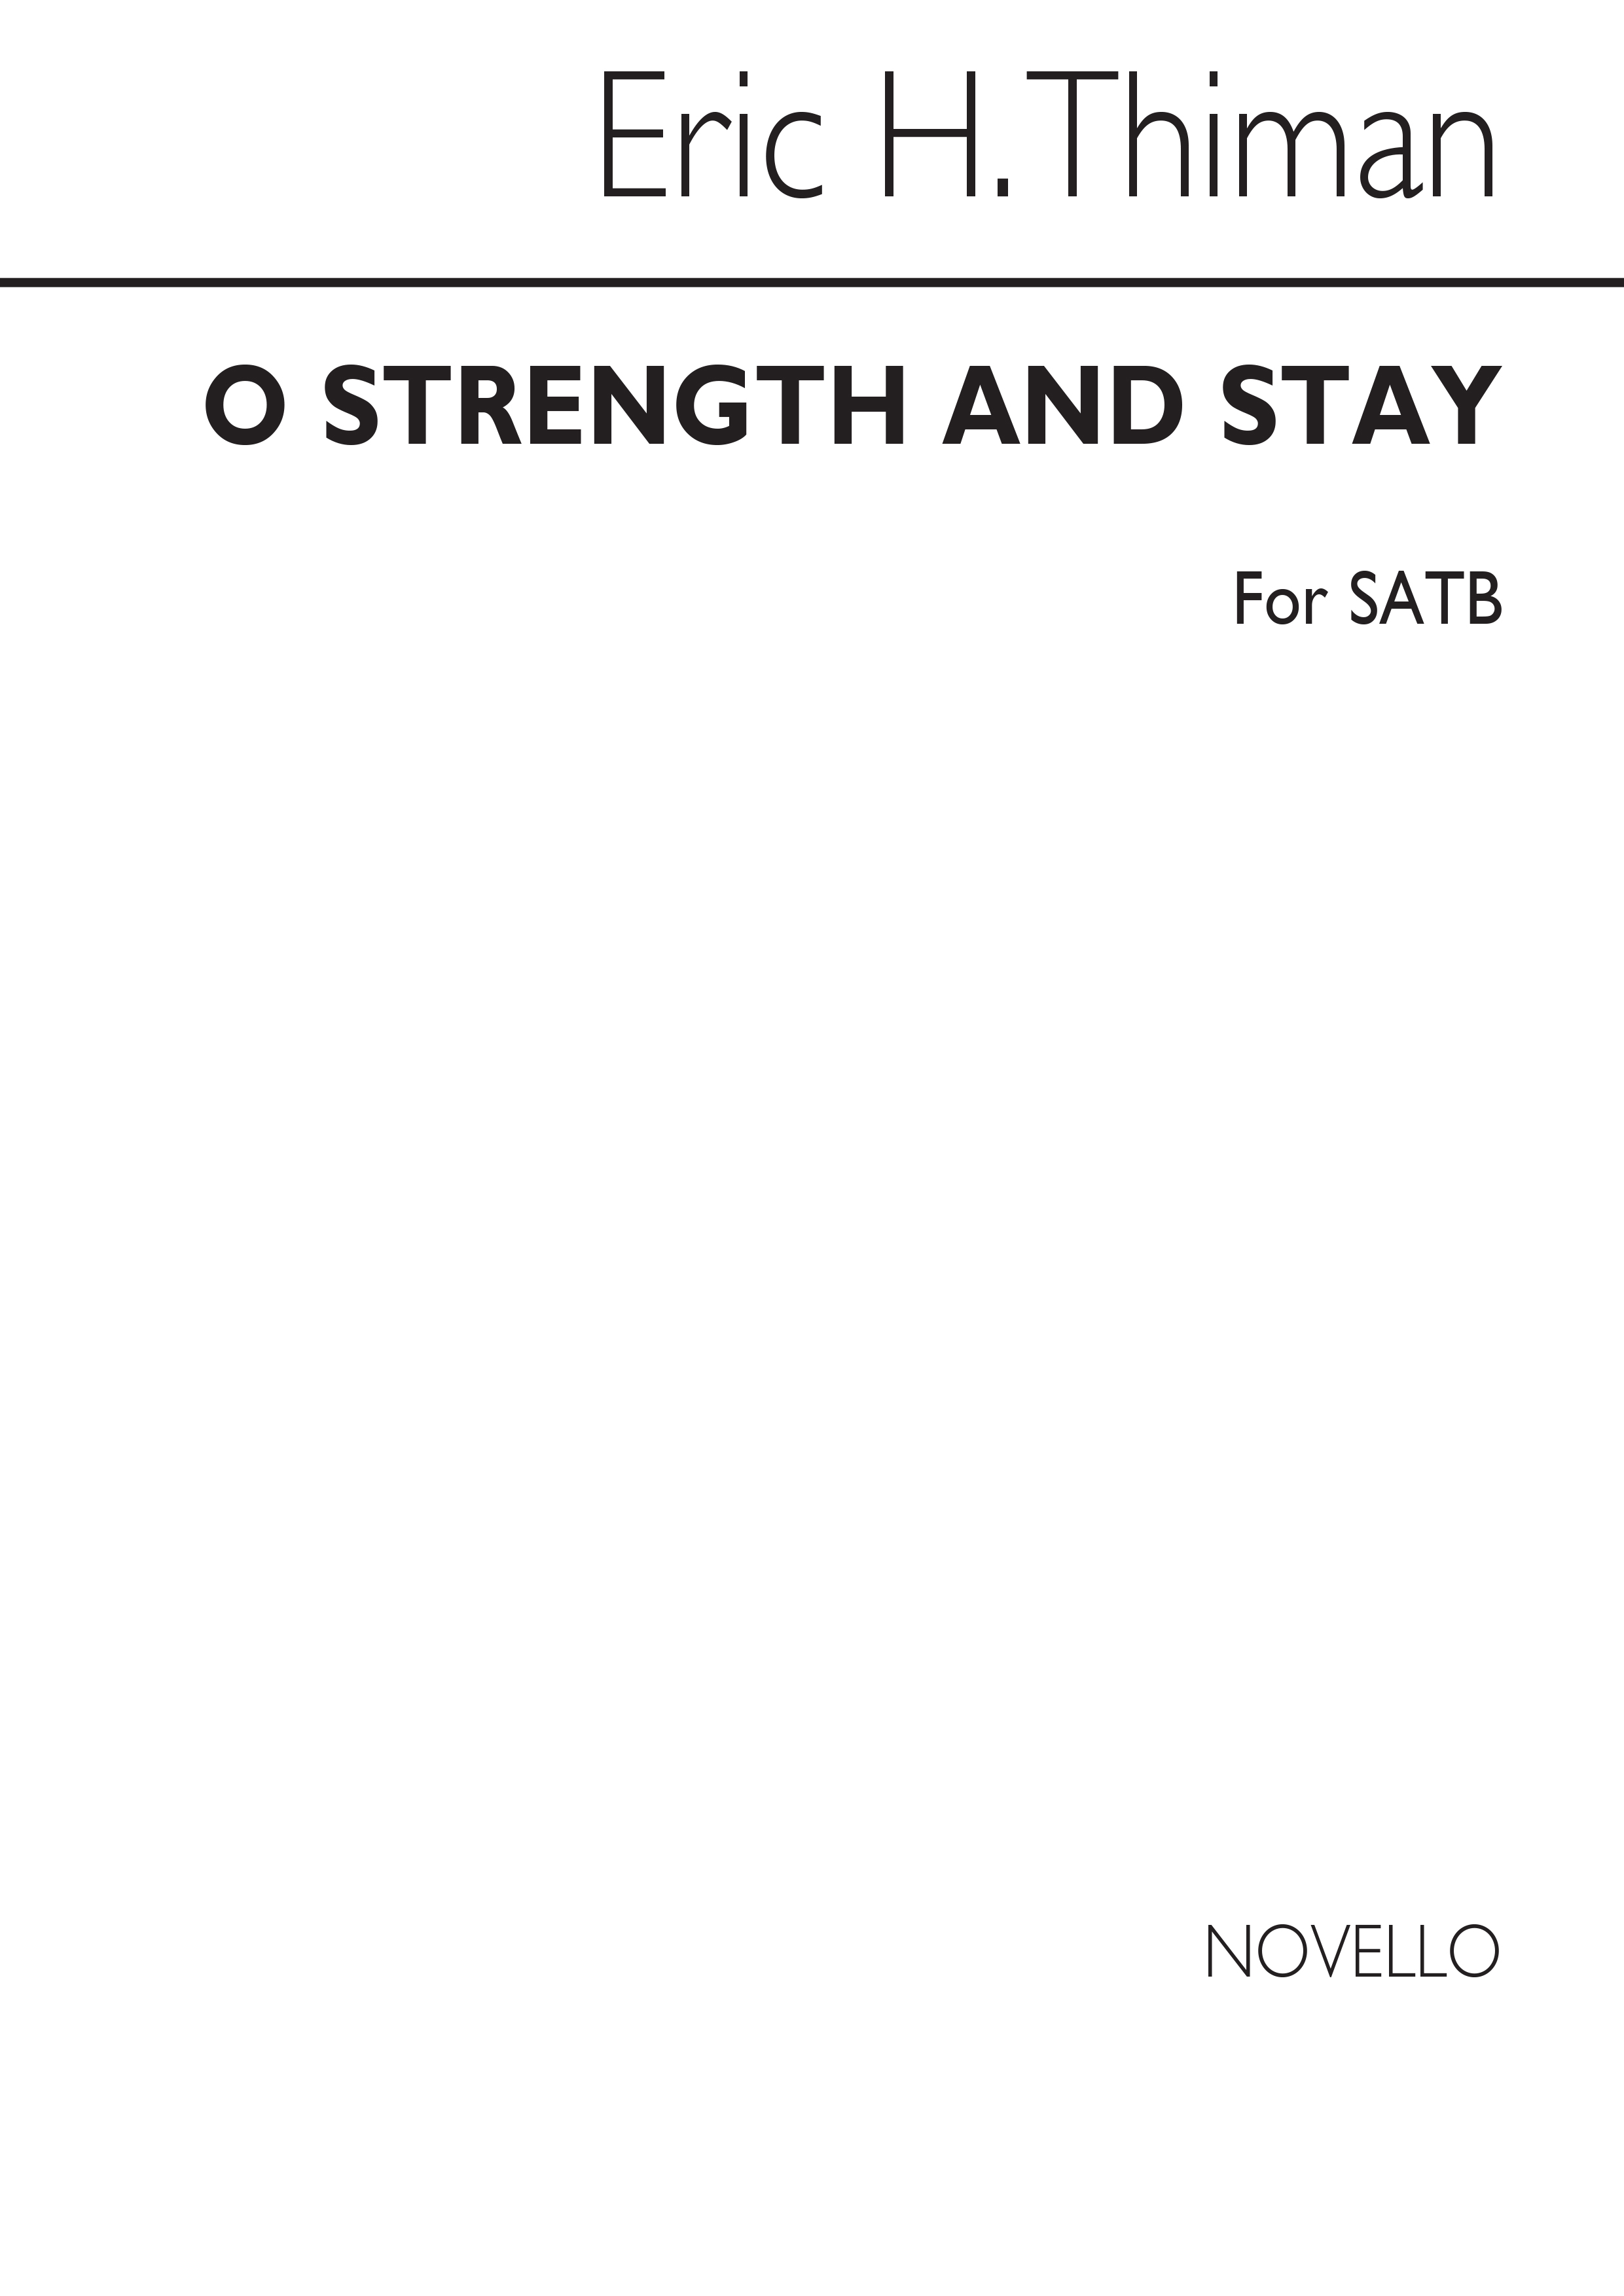 Thiman: O Strength And Stay for SATB Chorus